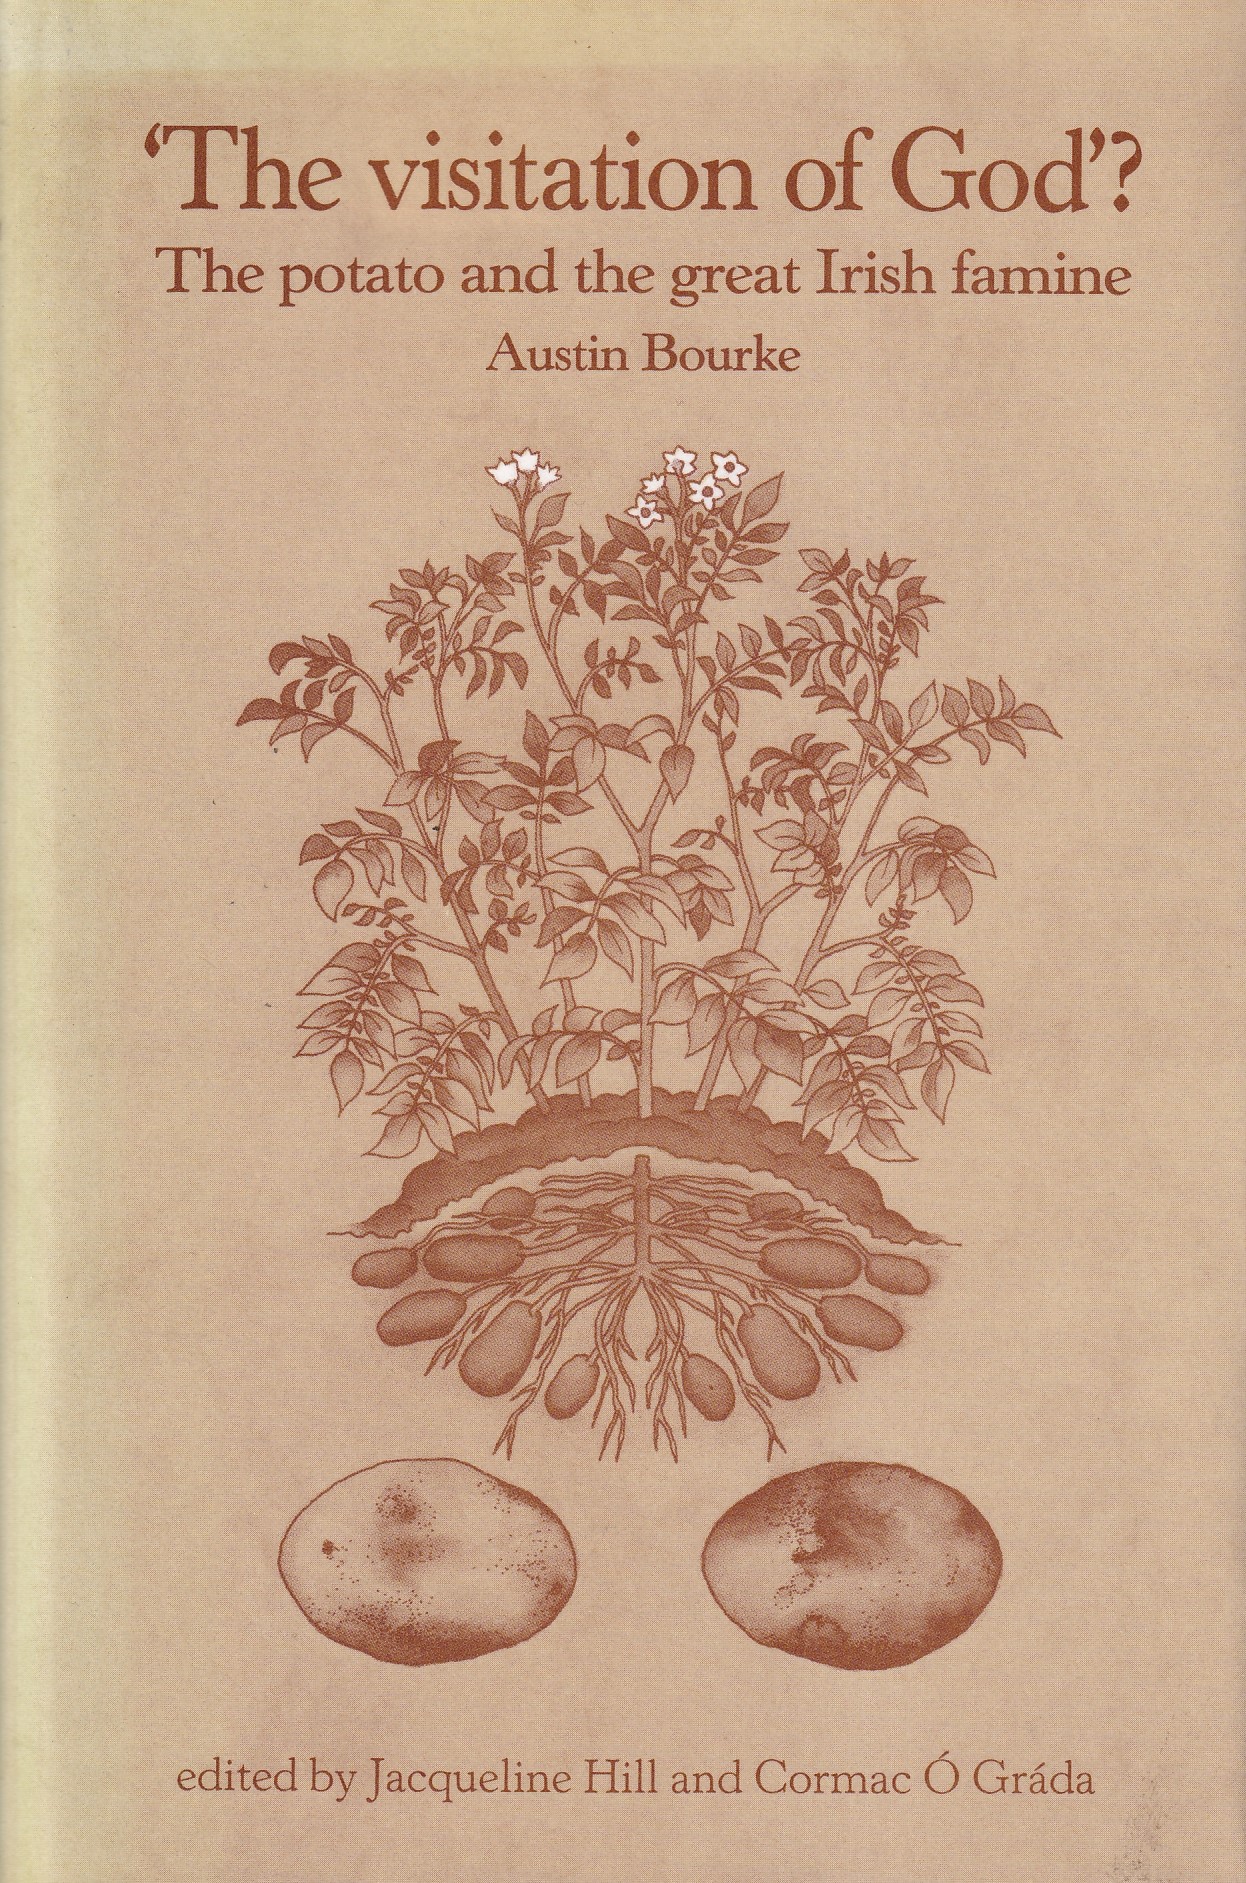 ‘The visitation of God?’: The potato and the great Irish famine by Austin Bourke